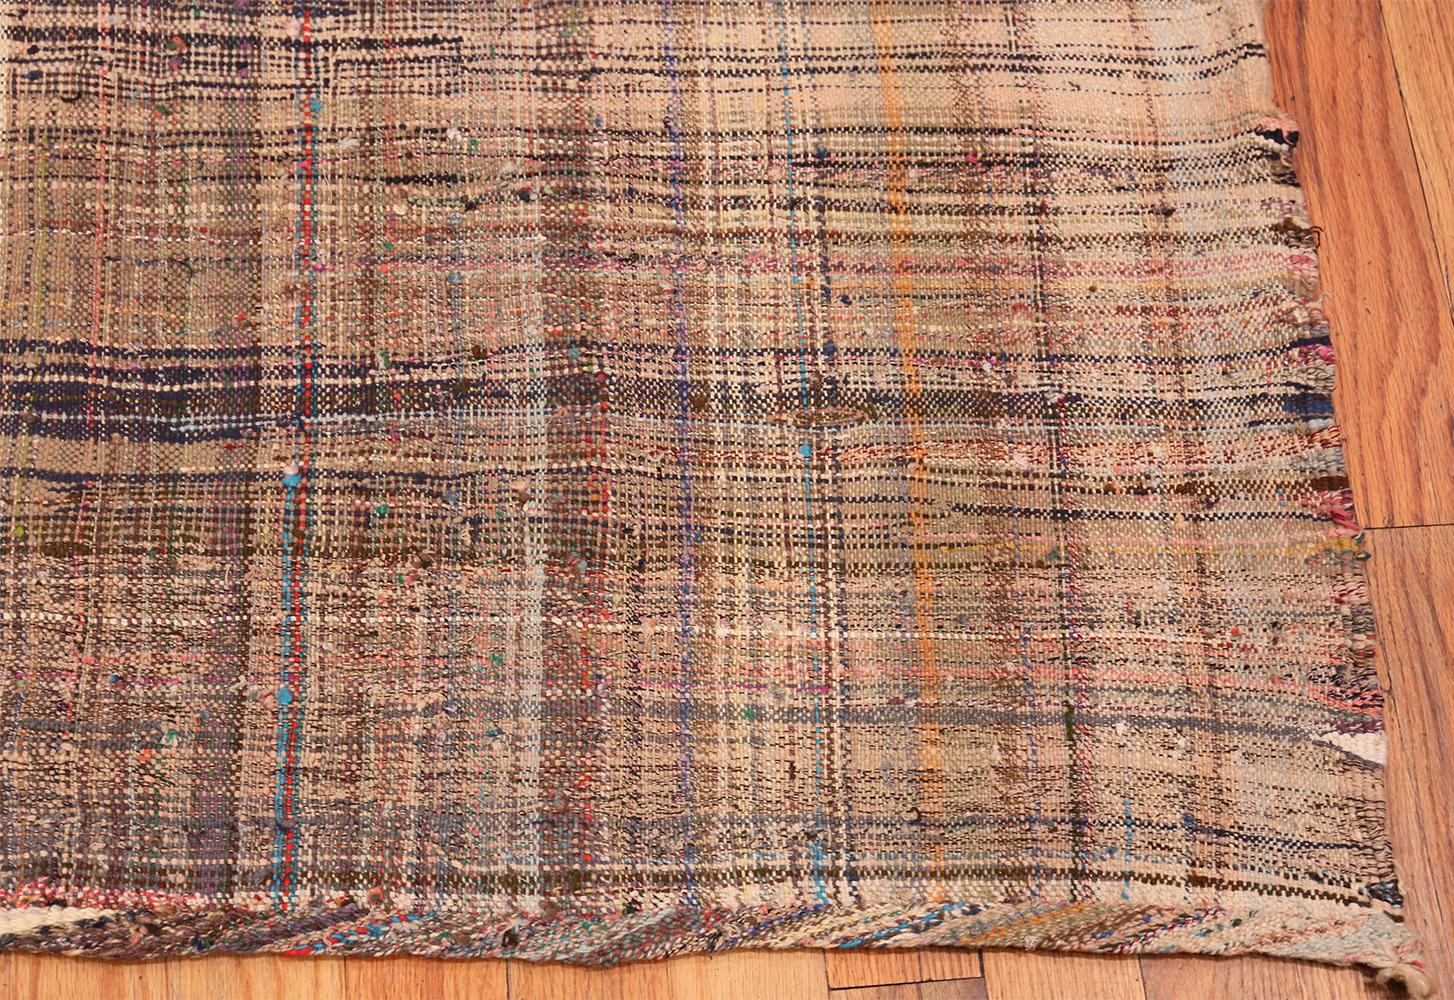 Vintage Persian Kilim Rug. Size: 7 ft 10 in x 11 ft 5 in In Good Condition For Sale In New York, NY